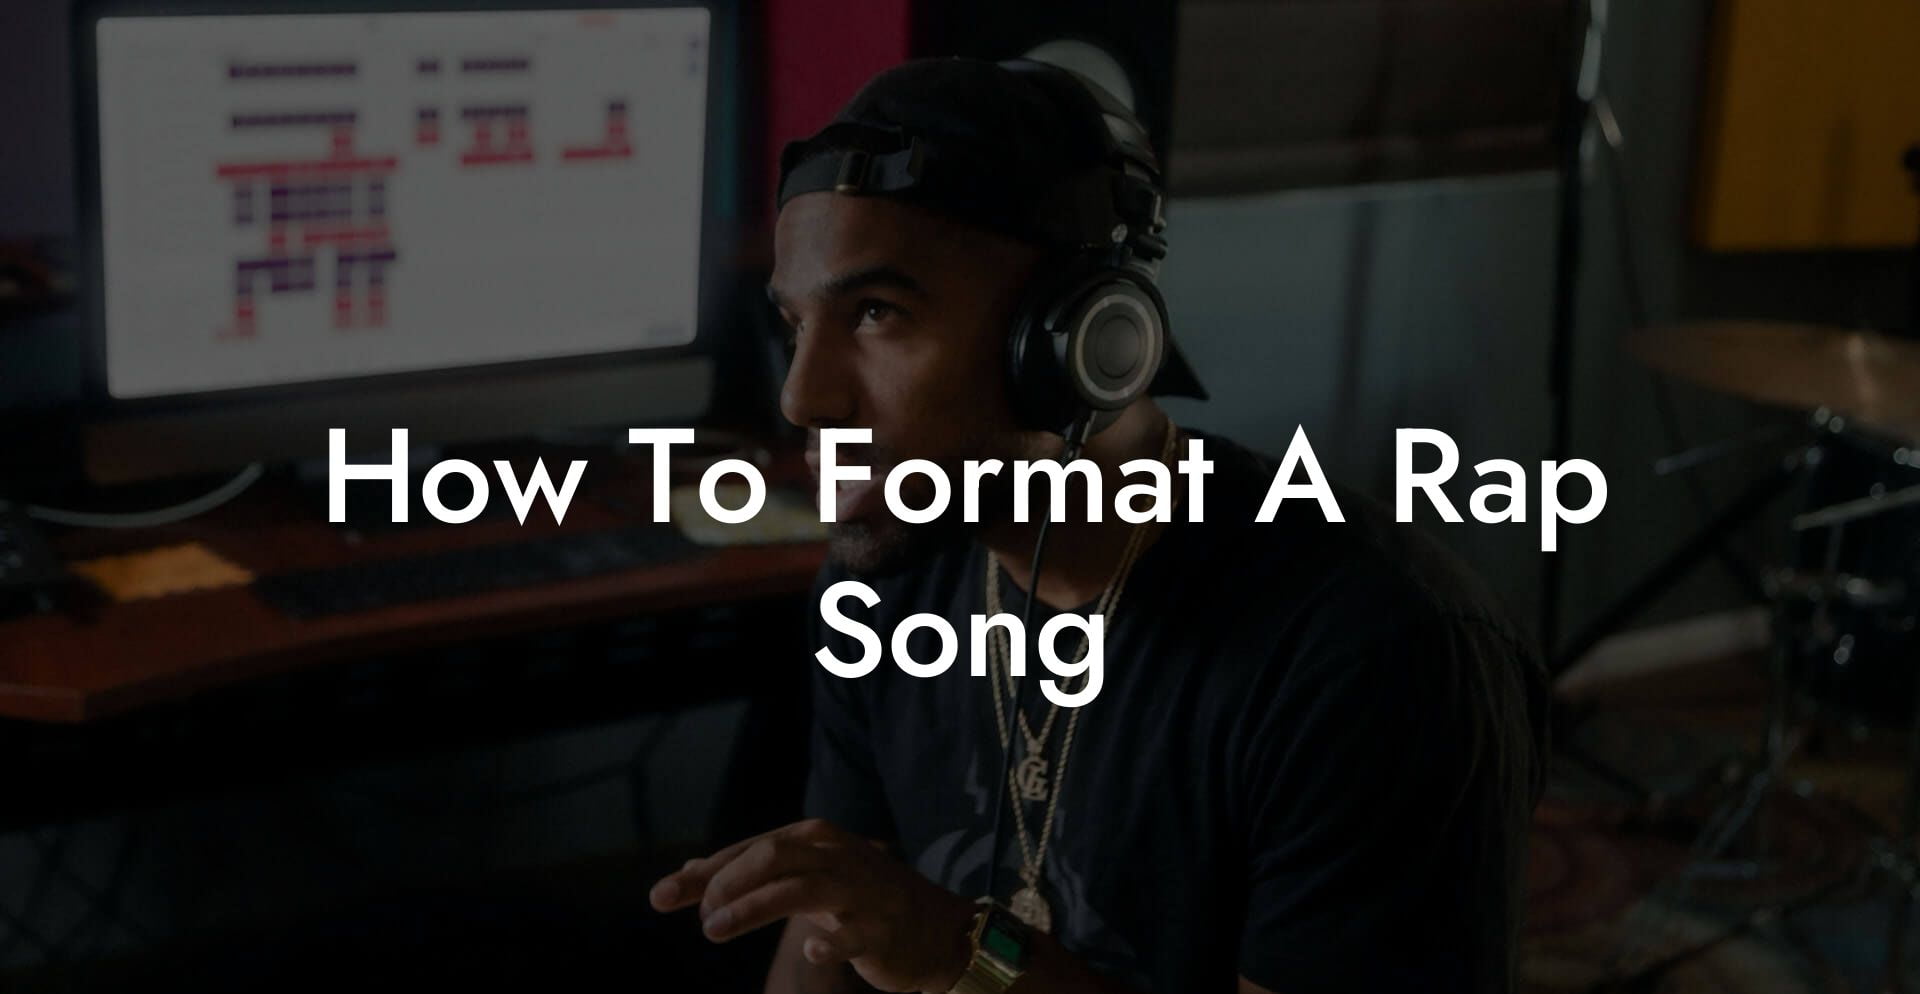 how to format a rap song lyric assistant